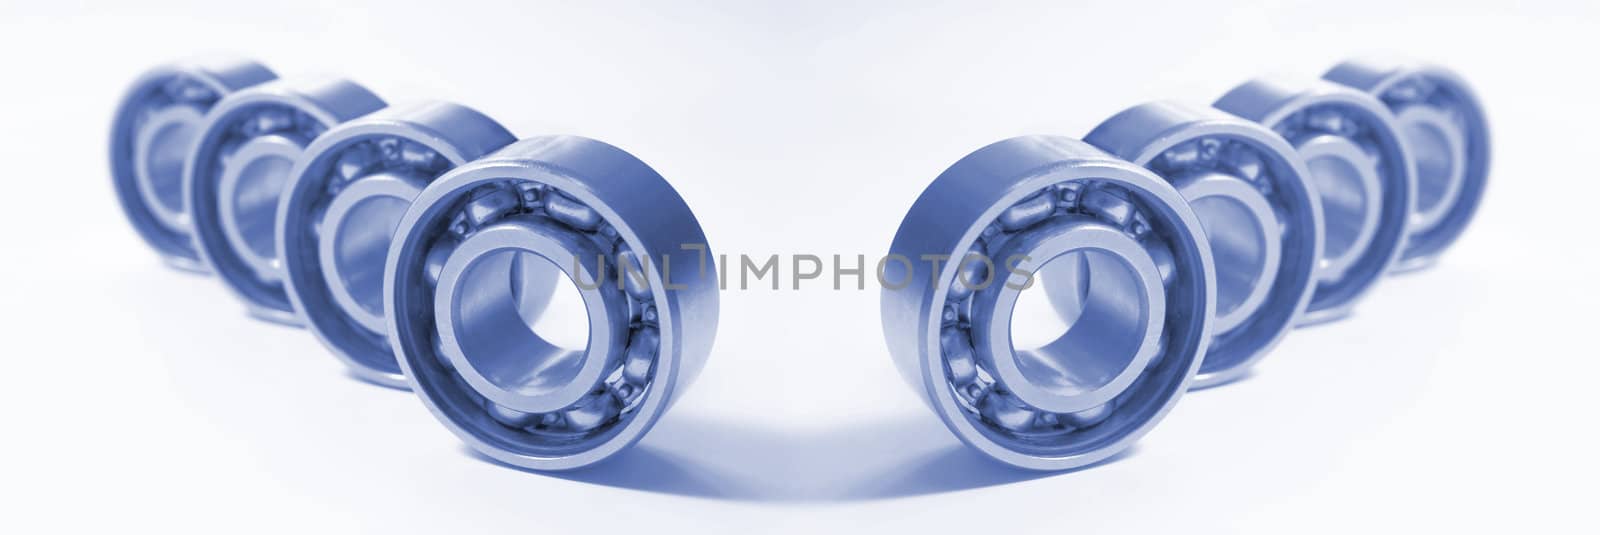 Bearings. The photo is made by close up and colorized dark blue colour.